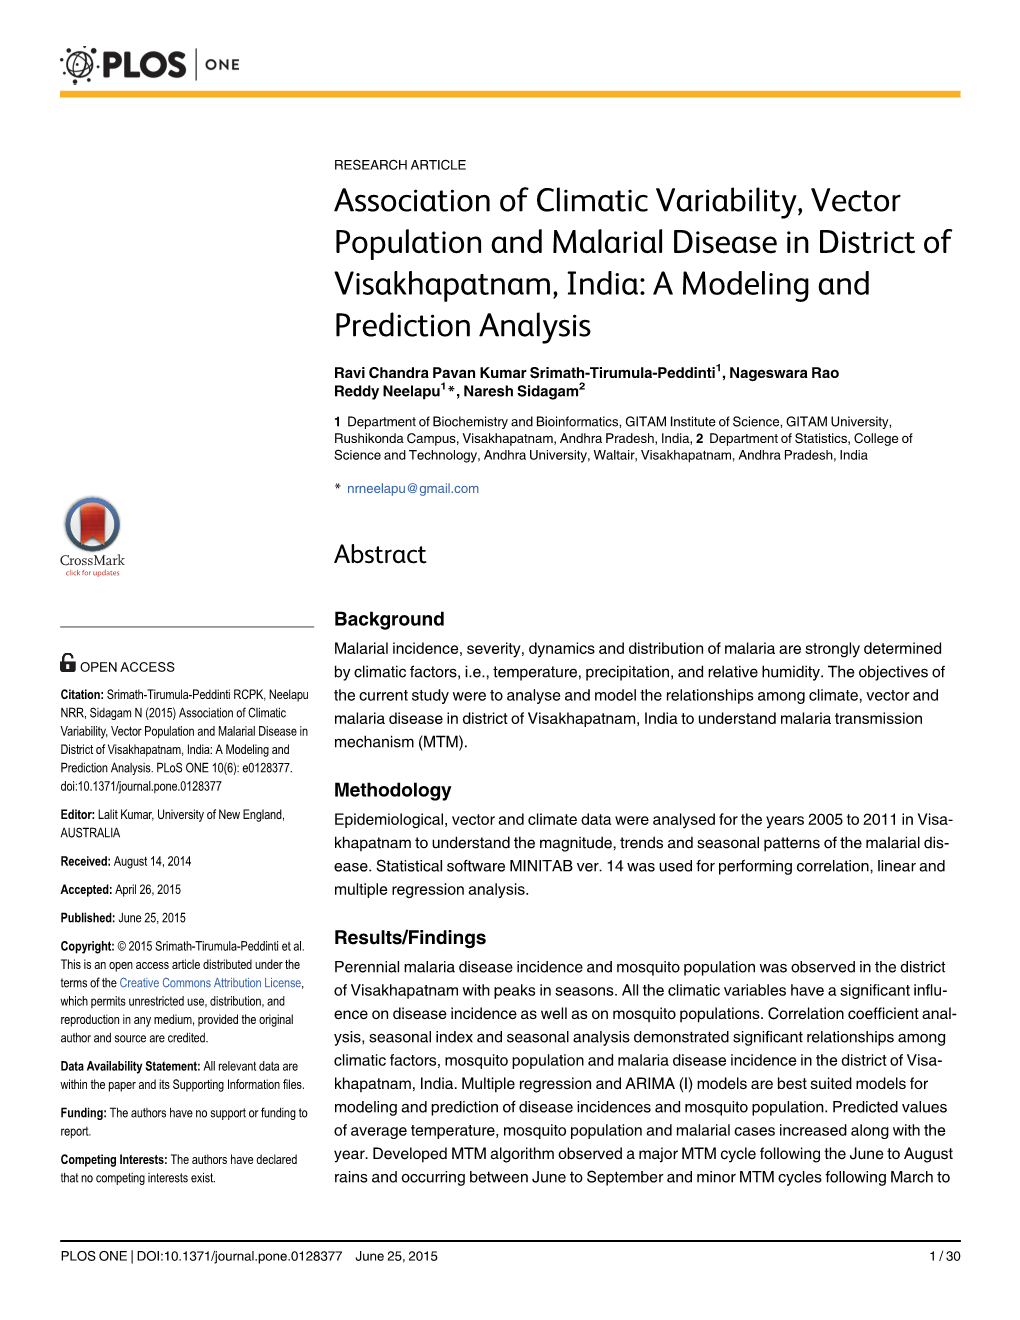 Association of Climatic Variability, Vector Population and Malarial Disease in District of Visakhapatnam, India: a Modeling and Prediction Analysis